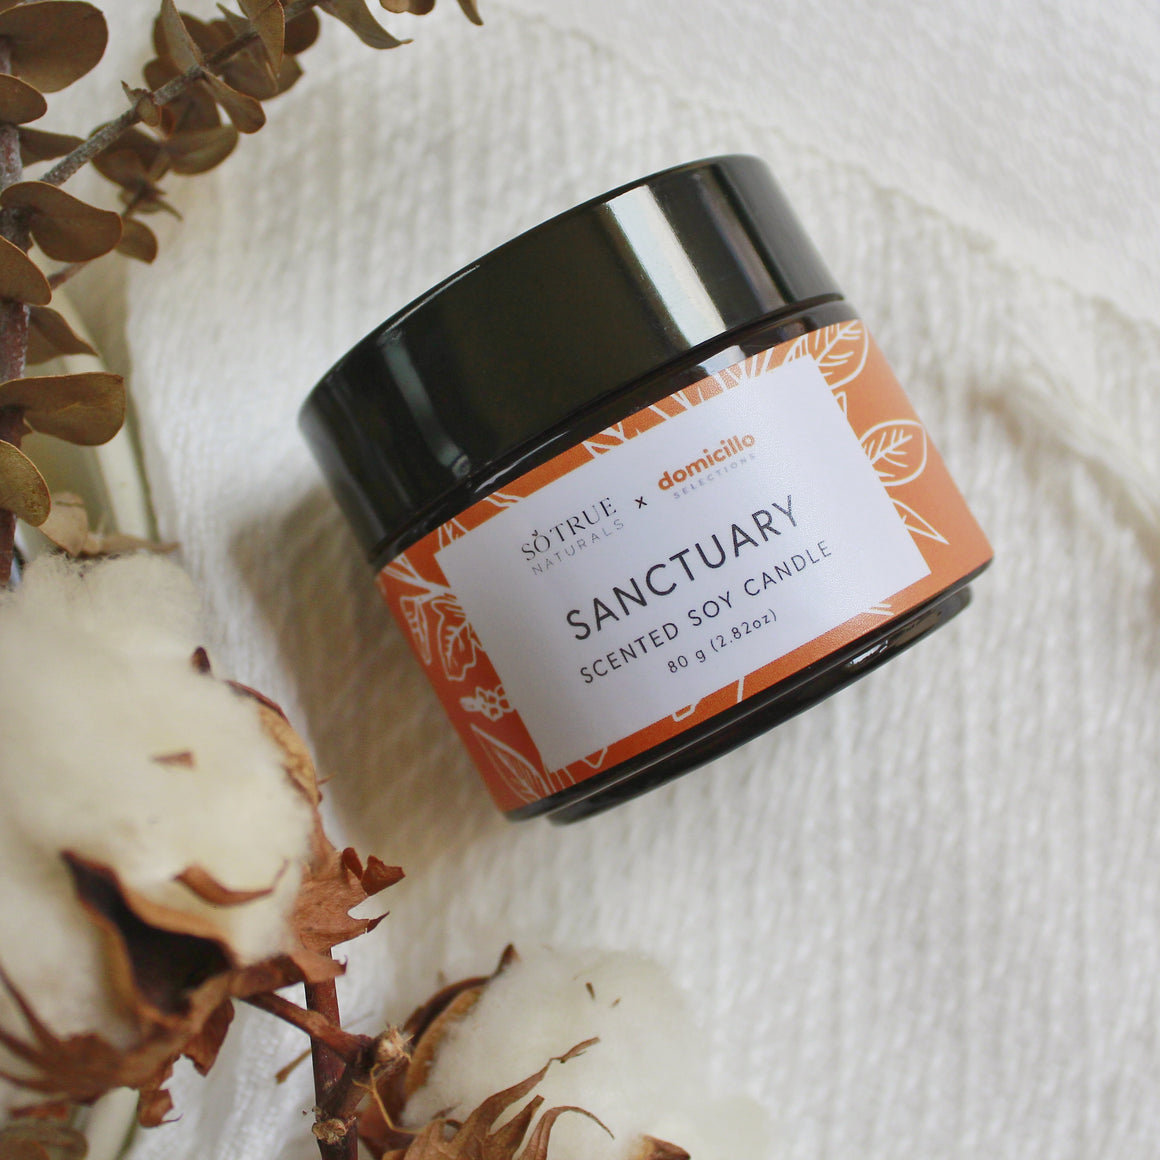 So True Naturals x Domicillo Selections Scented Soy Candle - Sanctuary